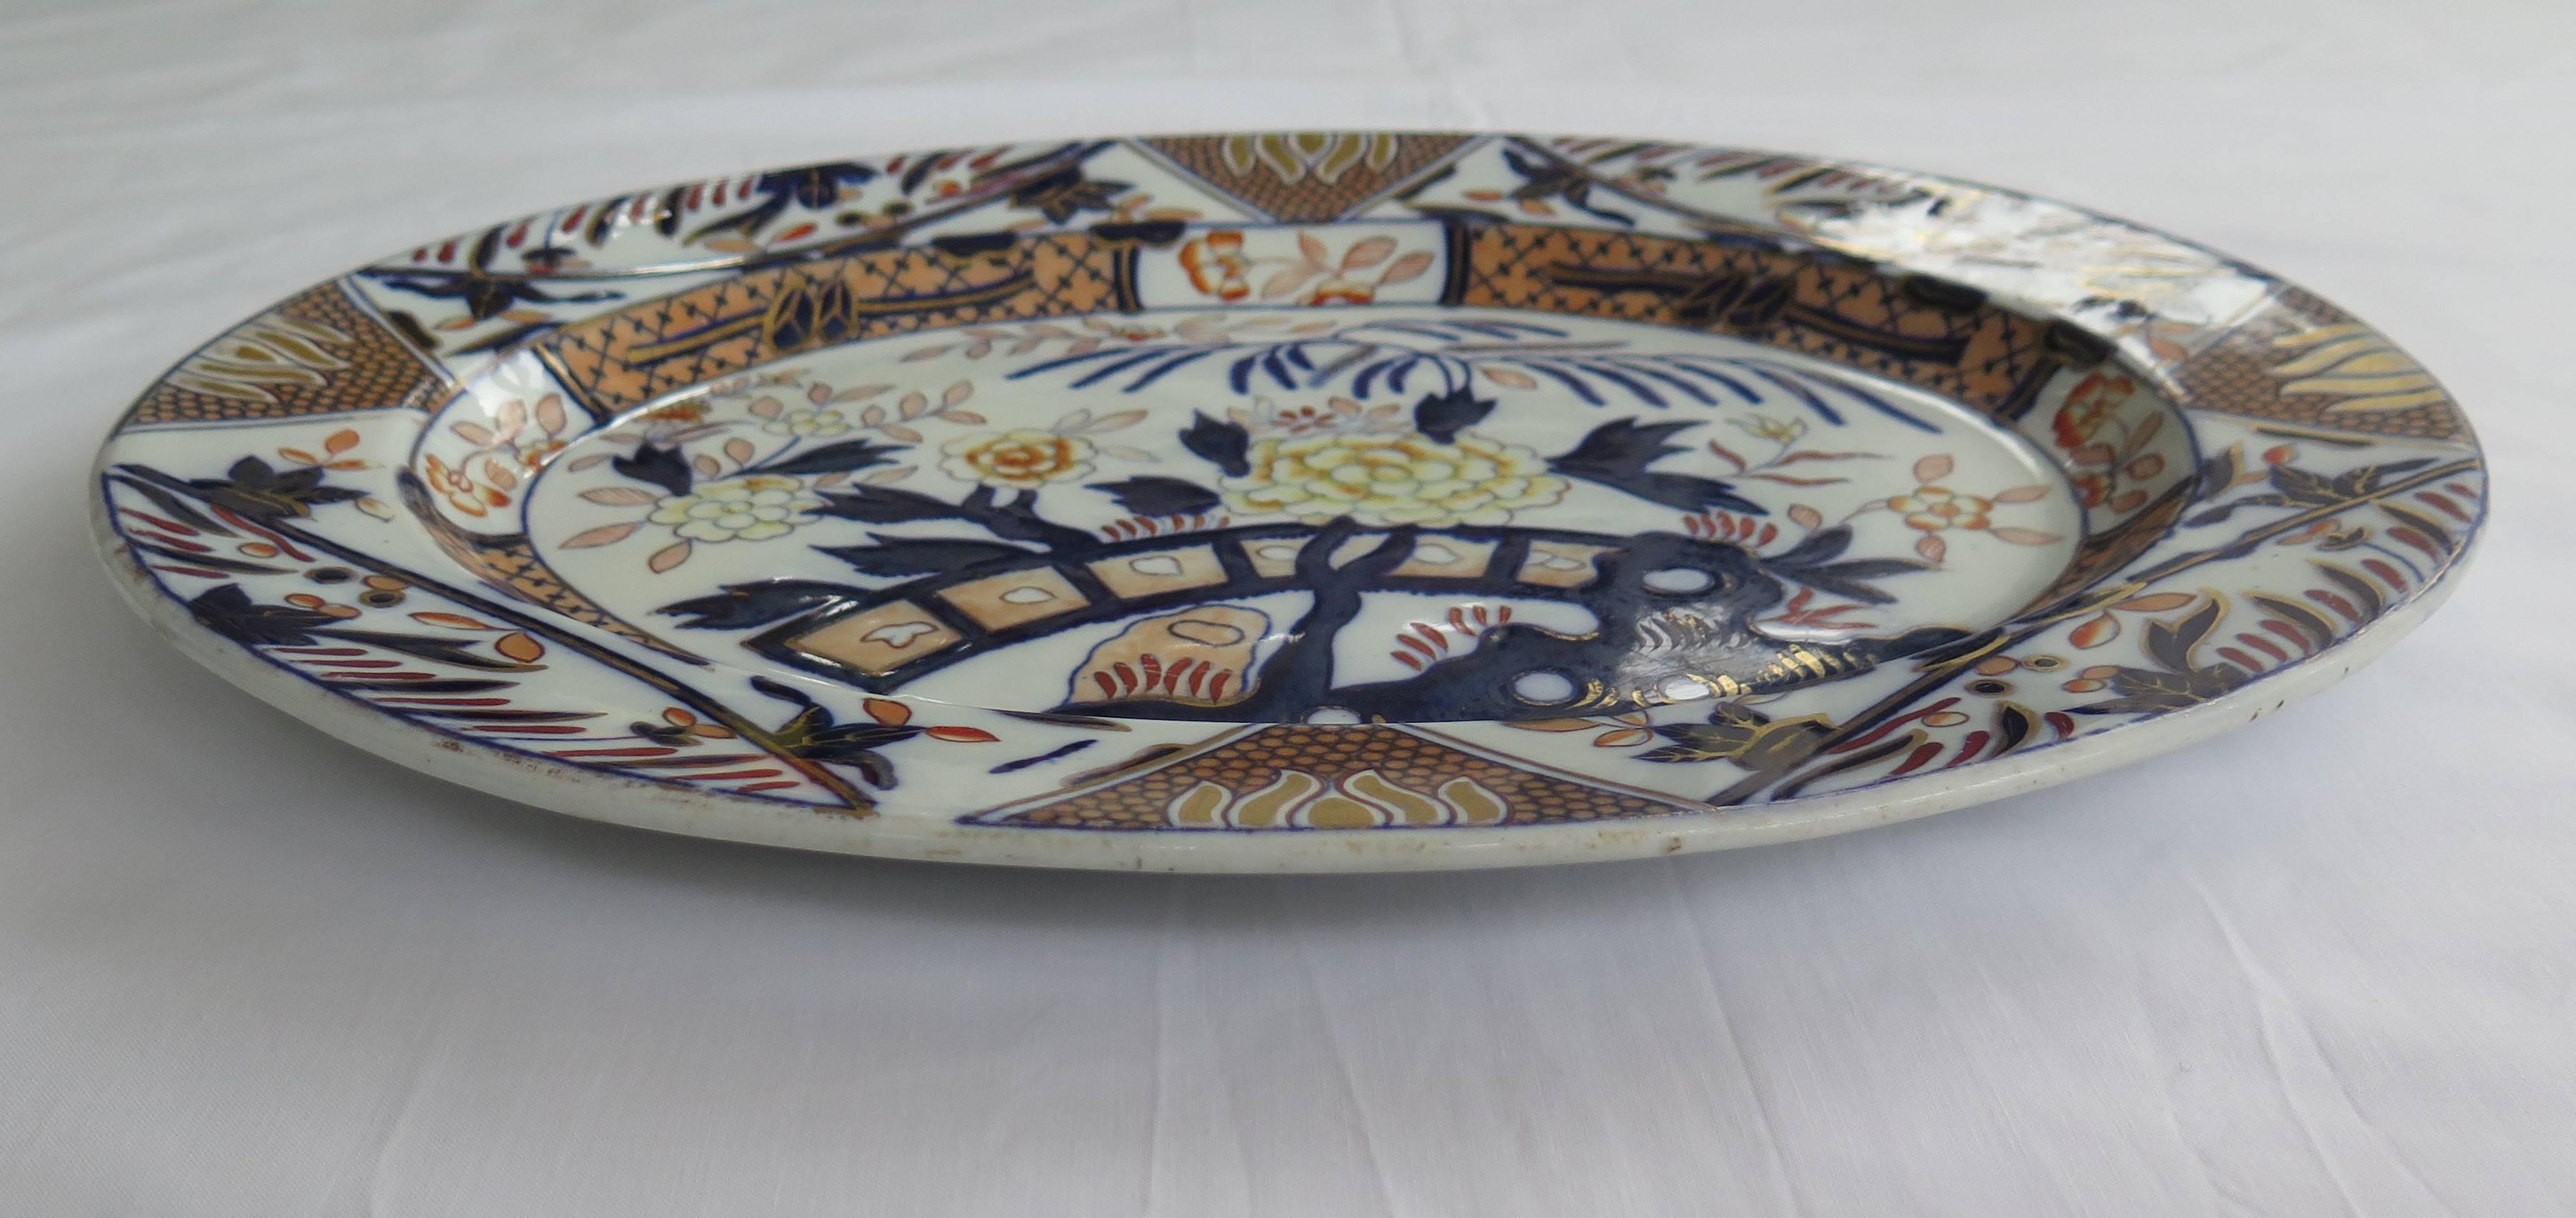 This is a mid-19th century MASON's ironstone platter produced at the time when Mason's was owned and controlled by George L Ashworth after the bankruptcy of C J Mason in 1848.

This large oval meat platter is decorated in a striking chinoiserie